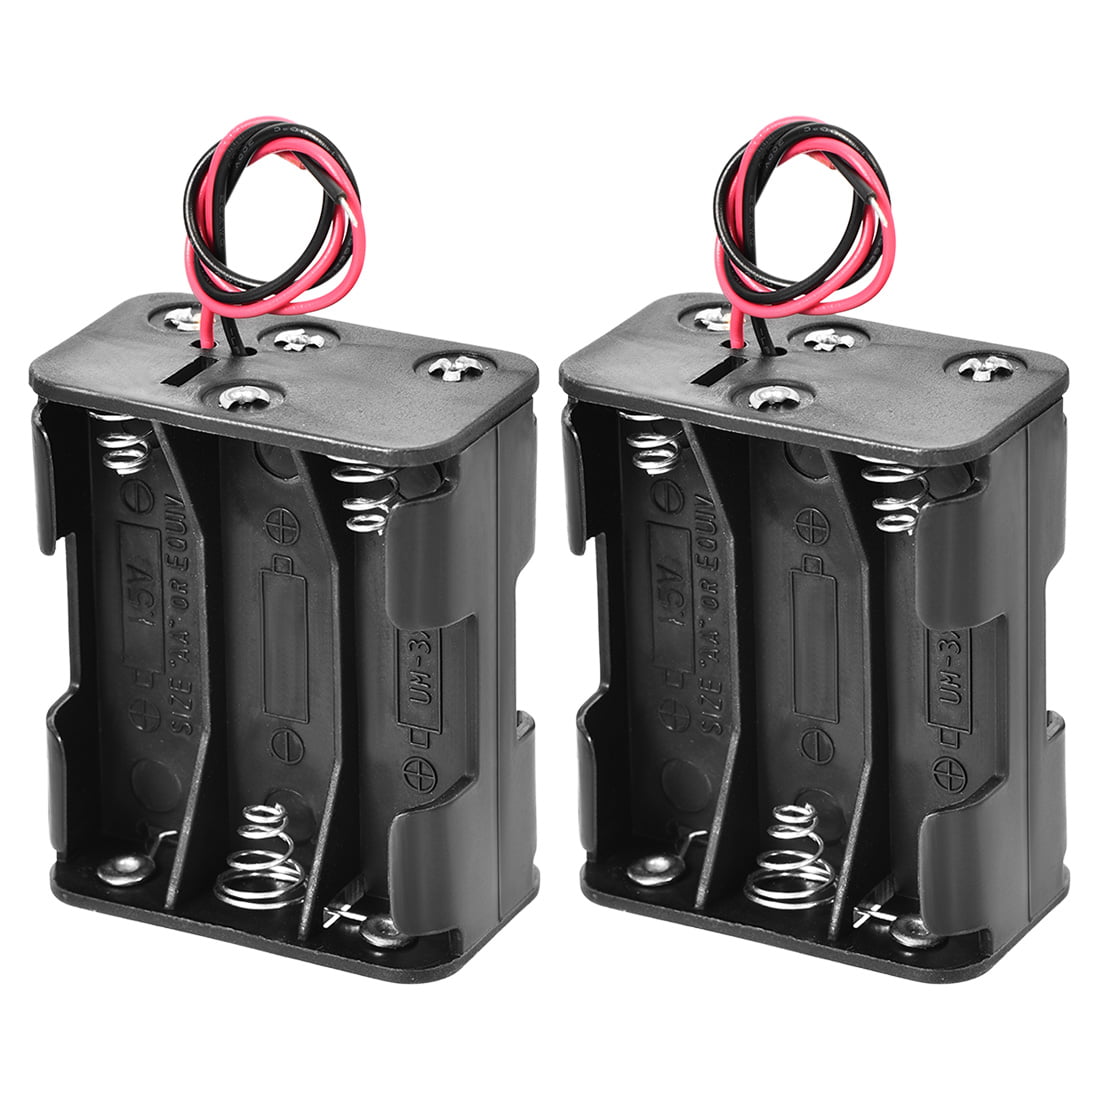 4 x Battery Clip Holder Case Box For 3 x D Size R20 HR20 Battery w/ 6" Wire Lead